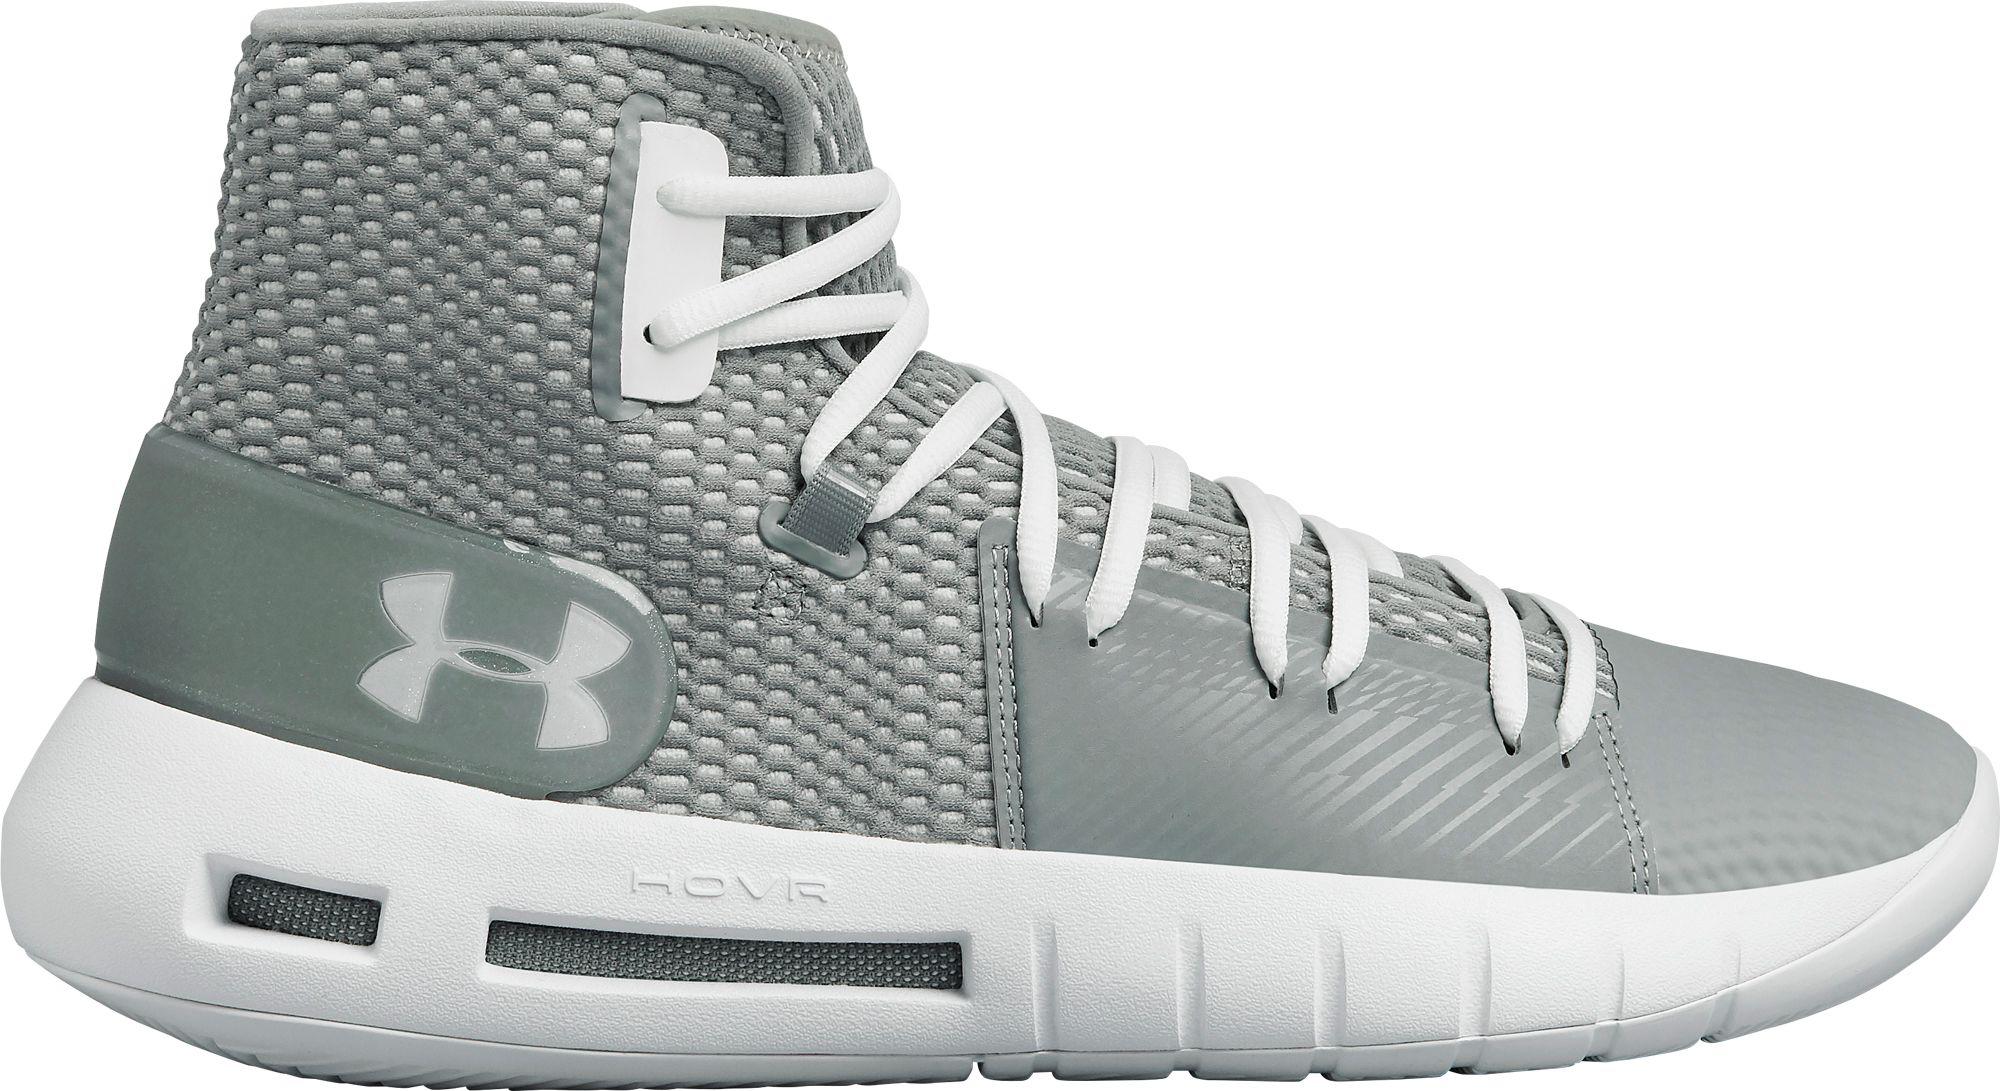 Under Armour Rubber Hovr Havoc Basketball Shoes in Grey/White (Gray ...